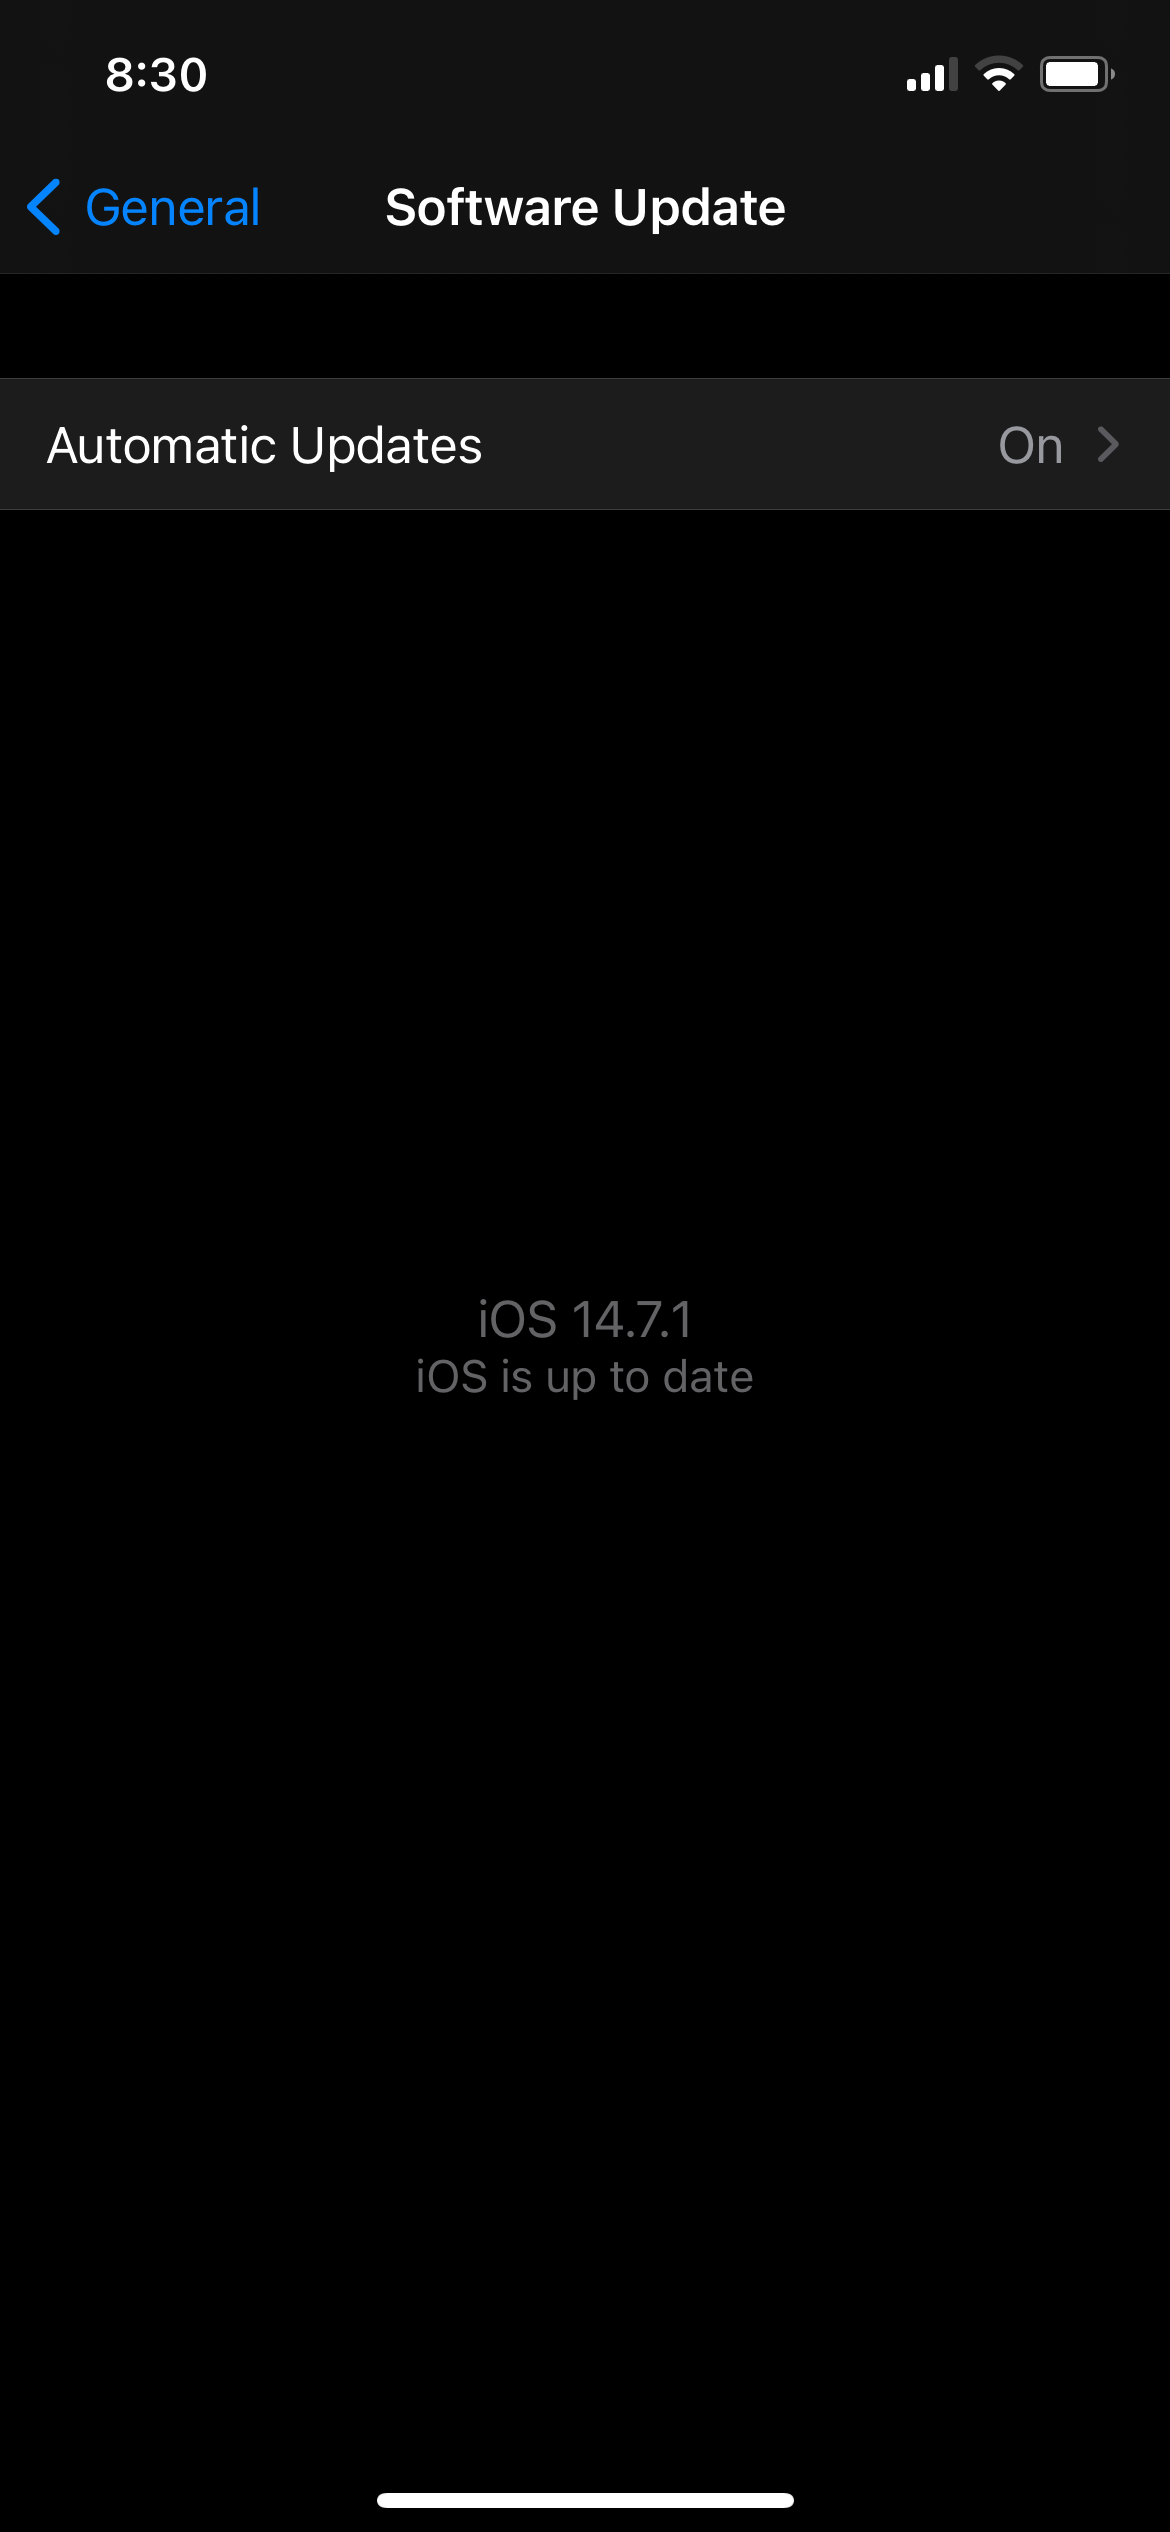 Automatic Updates for iOS